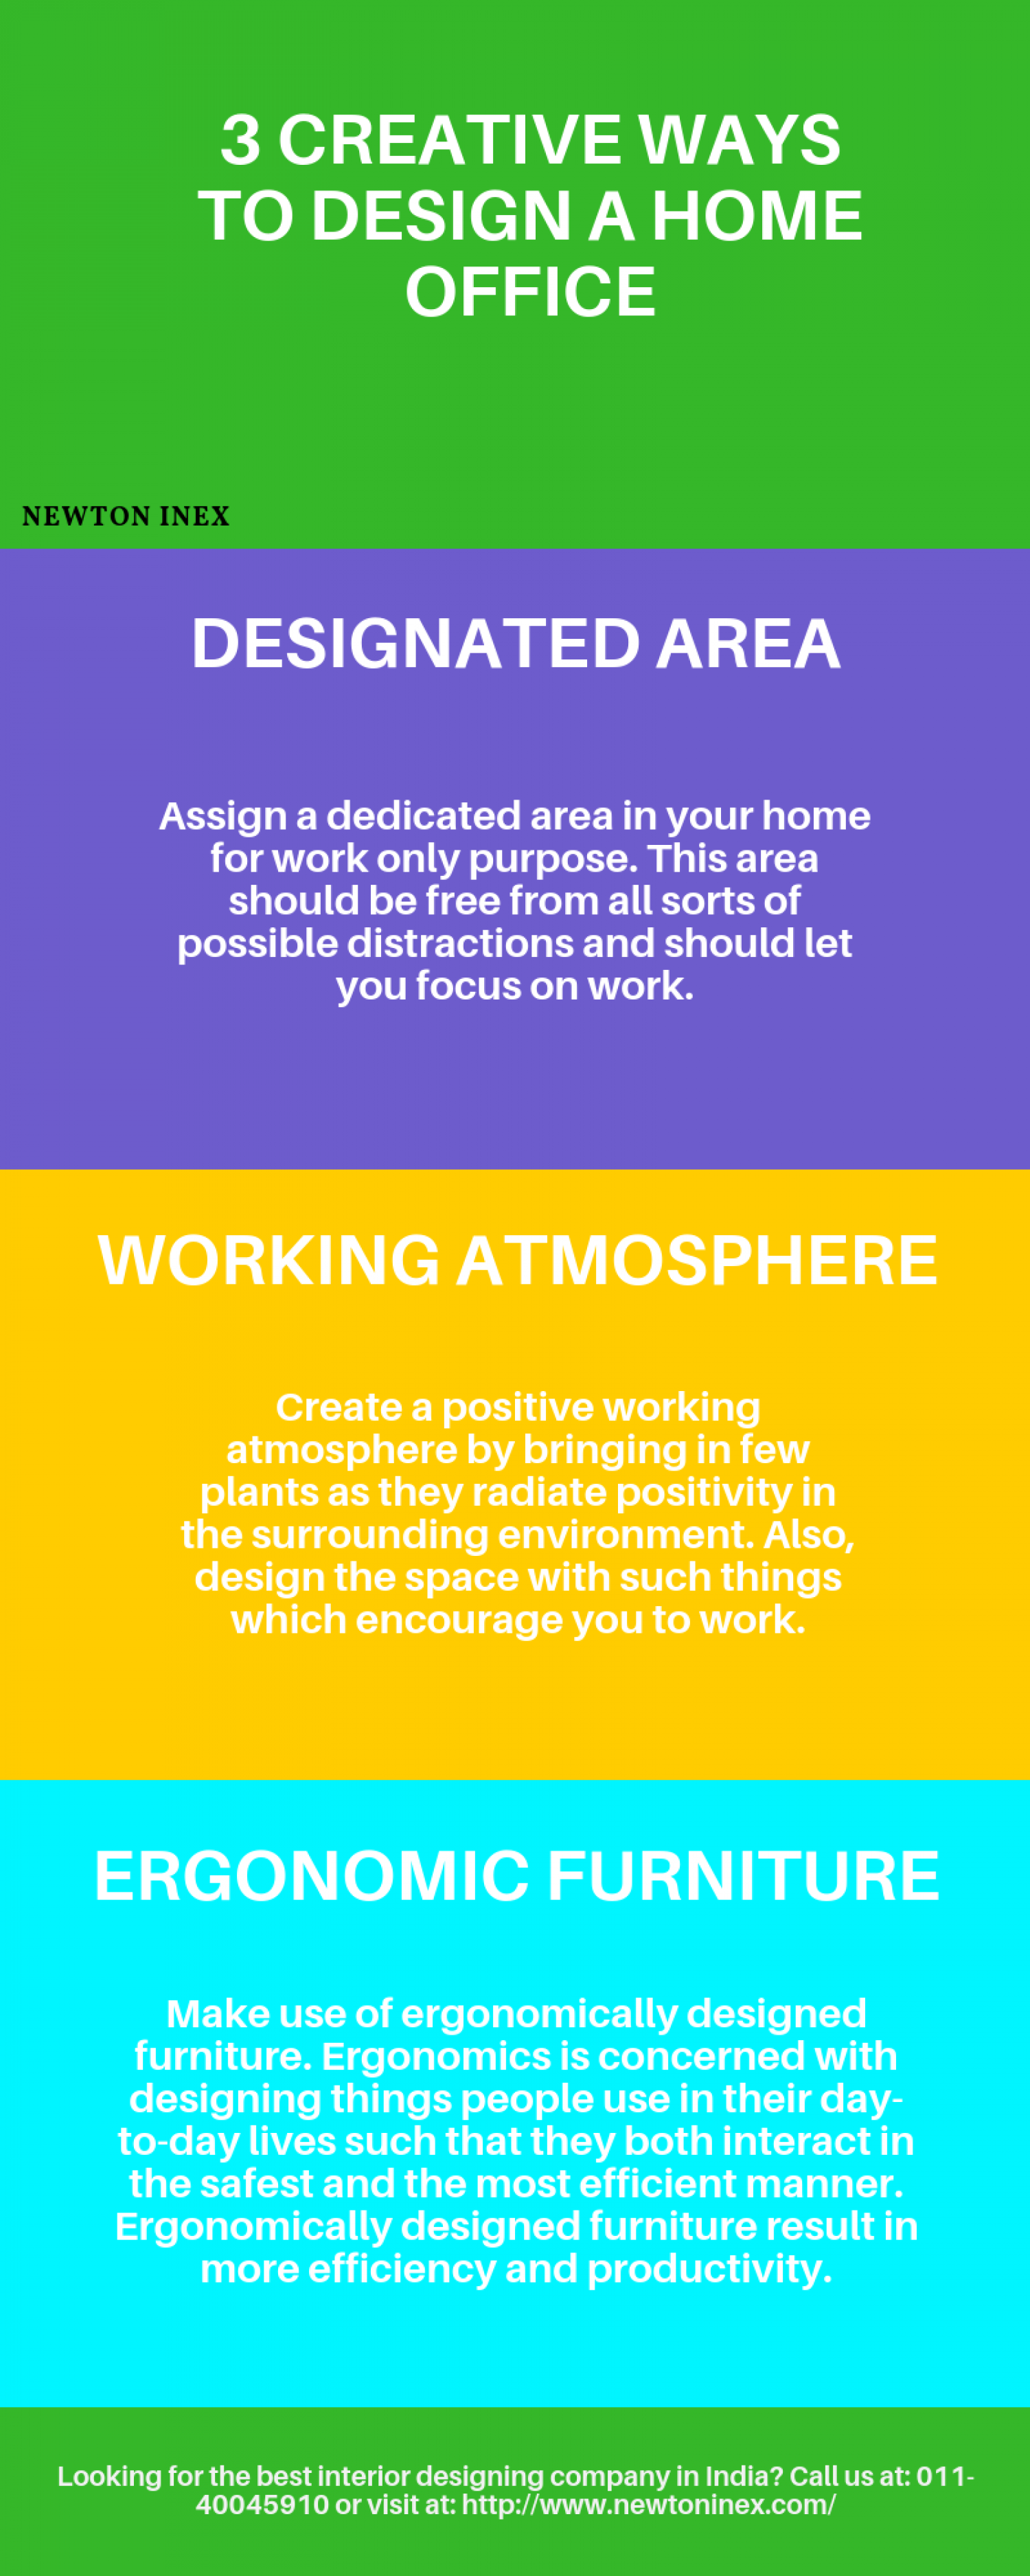 3 Creative Ways to Design a Home Office Infographic